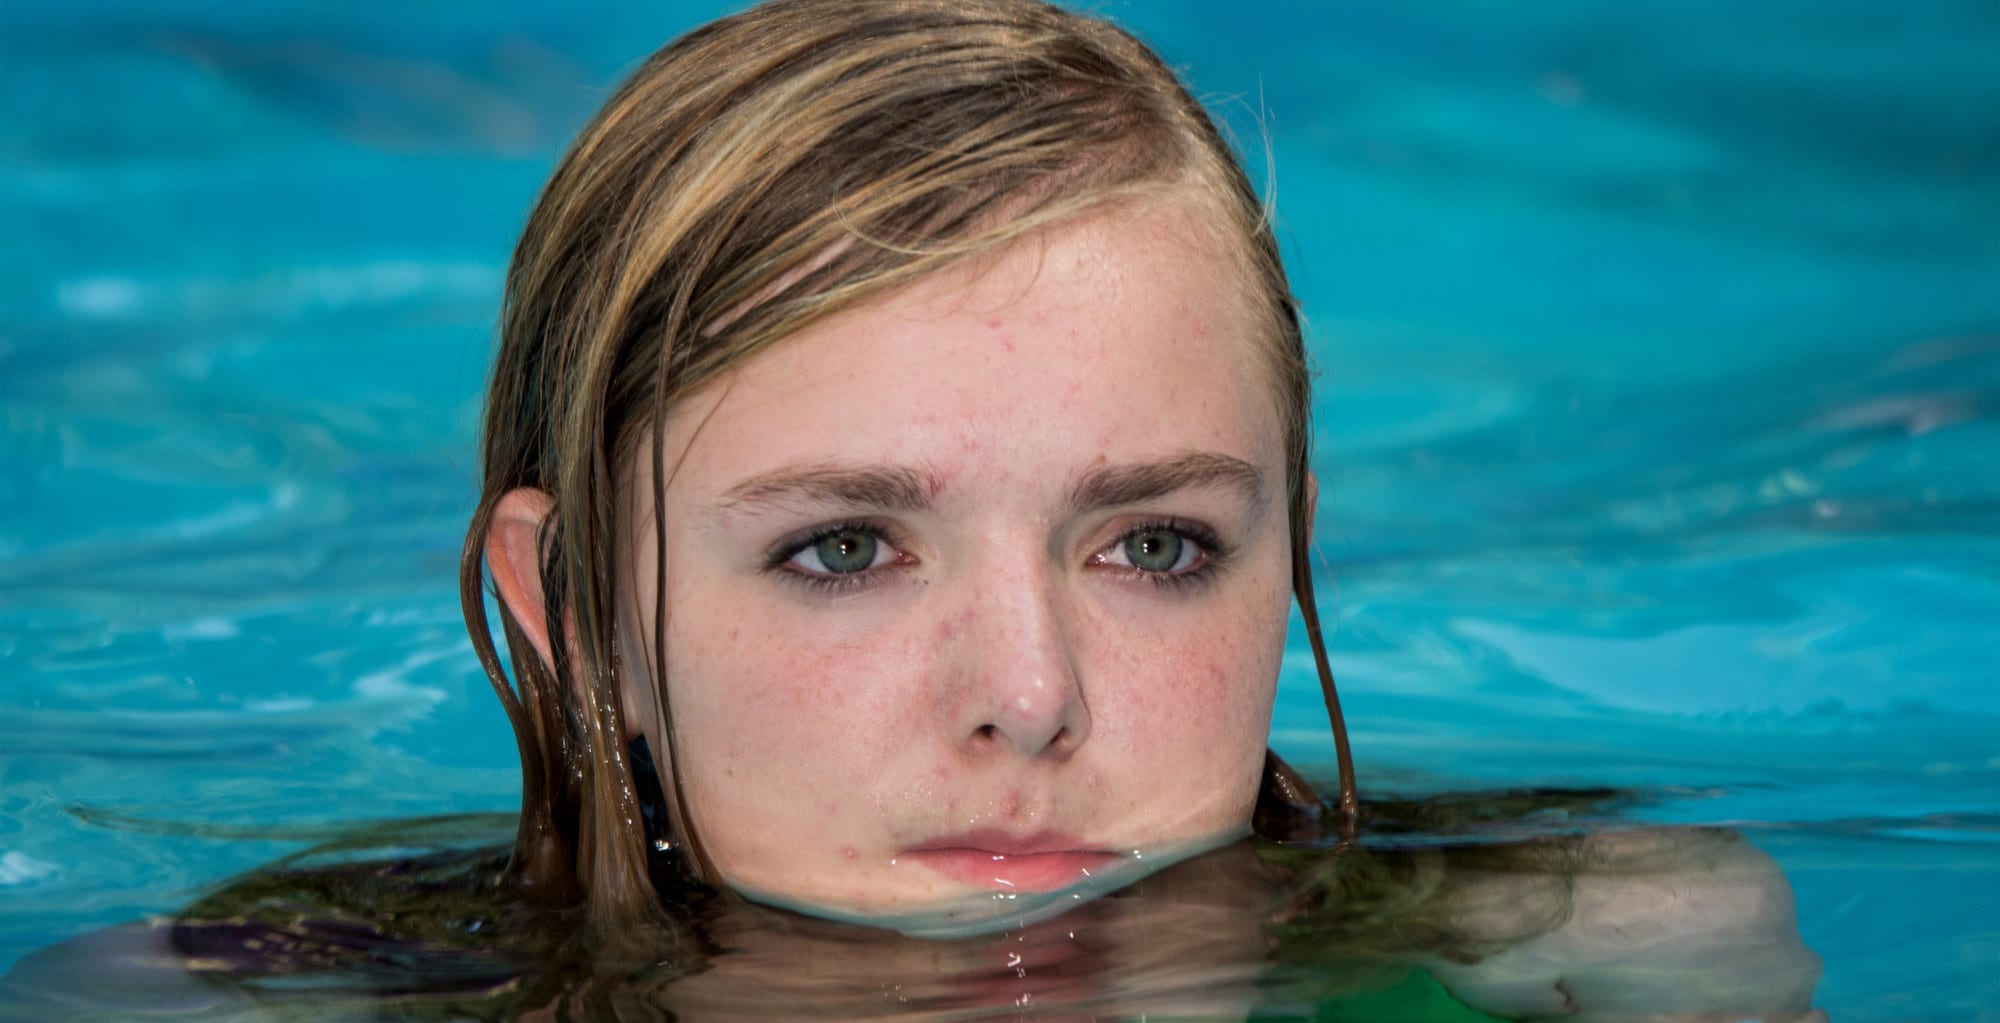 Bo Burnham’s coming-of-age dramedy 'Eighth Grade' follows an eighth-grader – played by Elsie Fisher (McFarland) – who endures the tidal wave of contemporary suburban adolescence and thus struggles to finish her last week of classes before heading to high school.